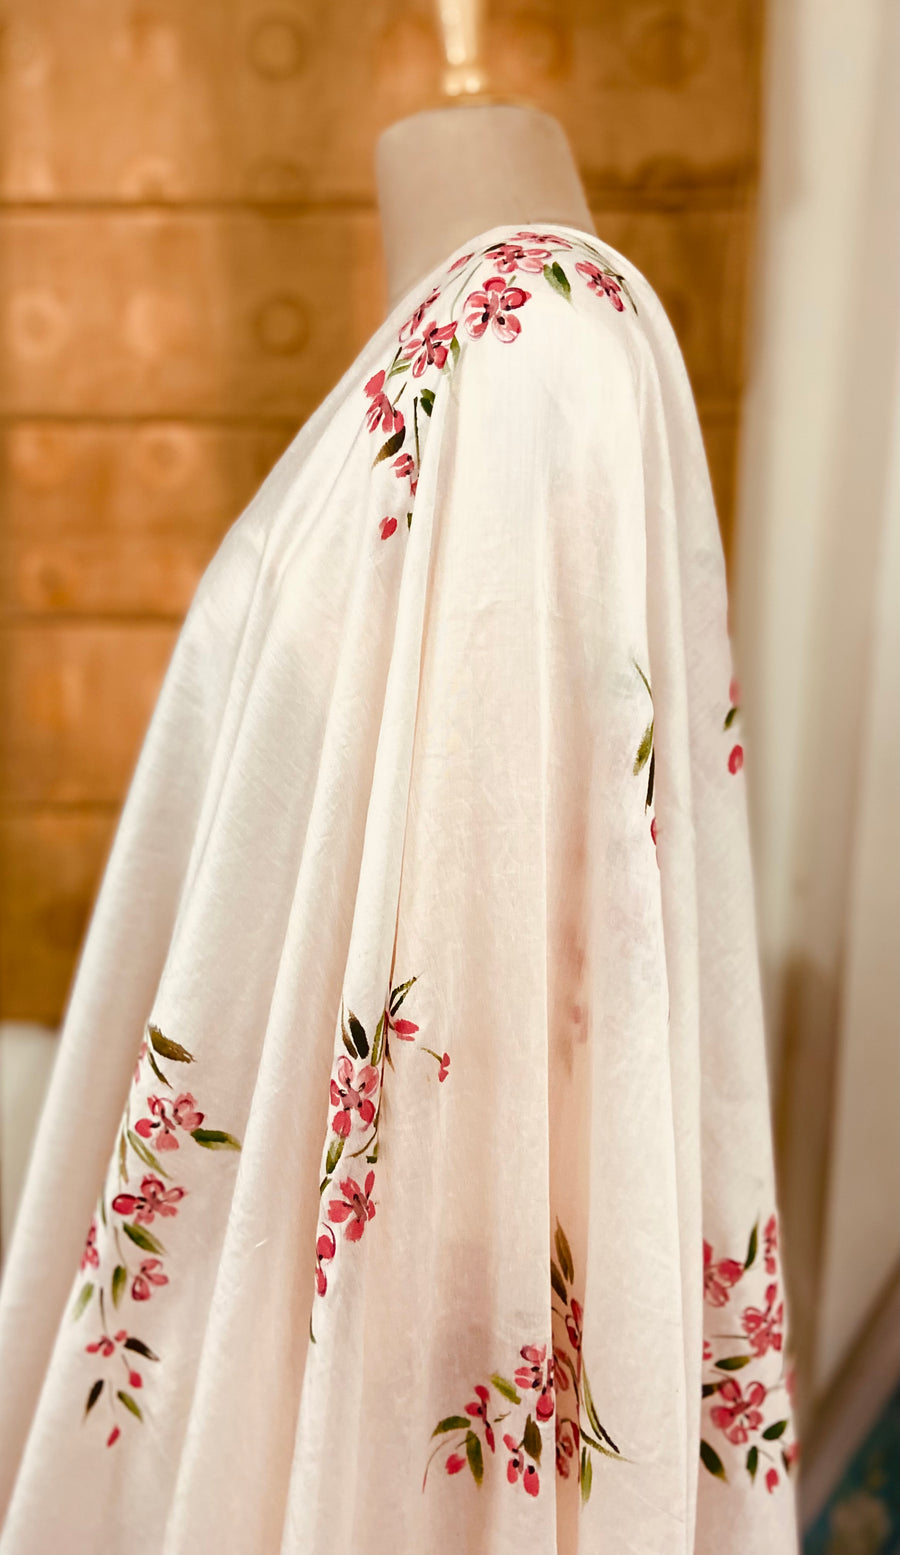 This Lovely suit set is done in pastel peach colour in pure silk chanderi and lined with fine mulmul. The dupatta is also in pure silk chanderi and is handpainted with deep pink daisies all over. Its a three piece suit set.Mulmul And More by Priyanka Bhambry